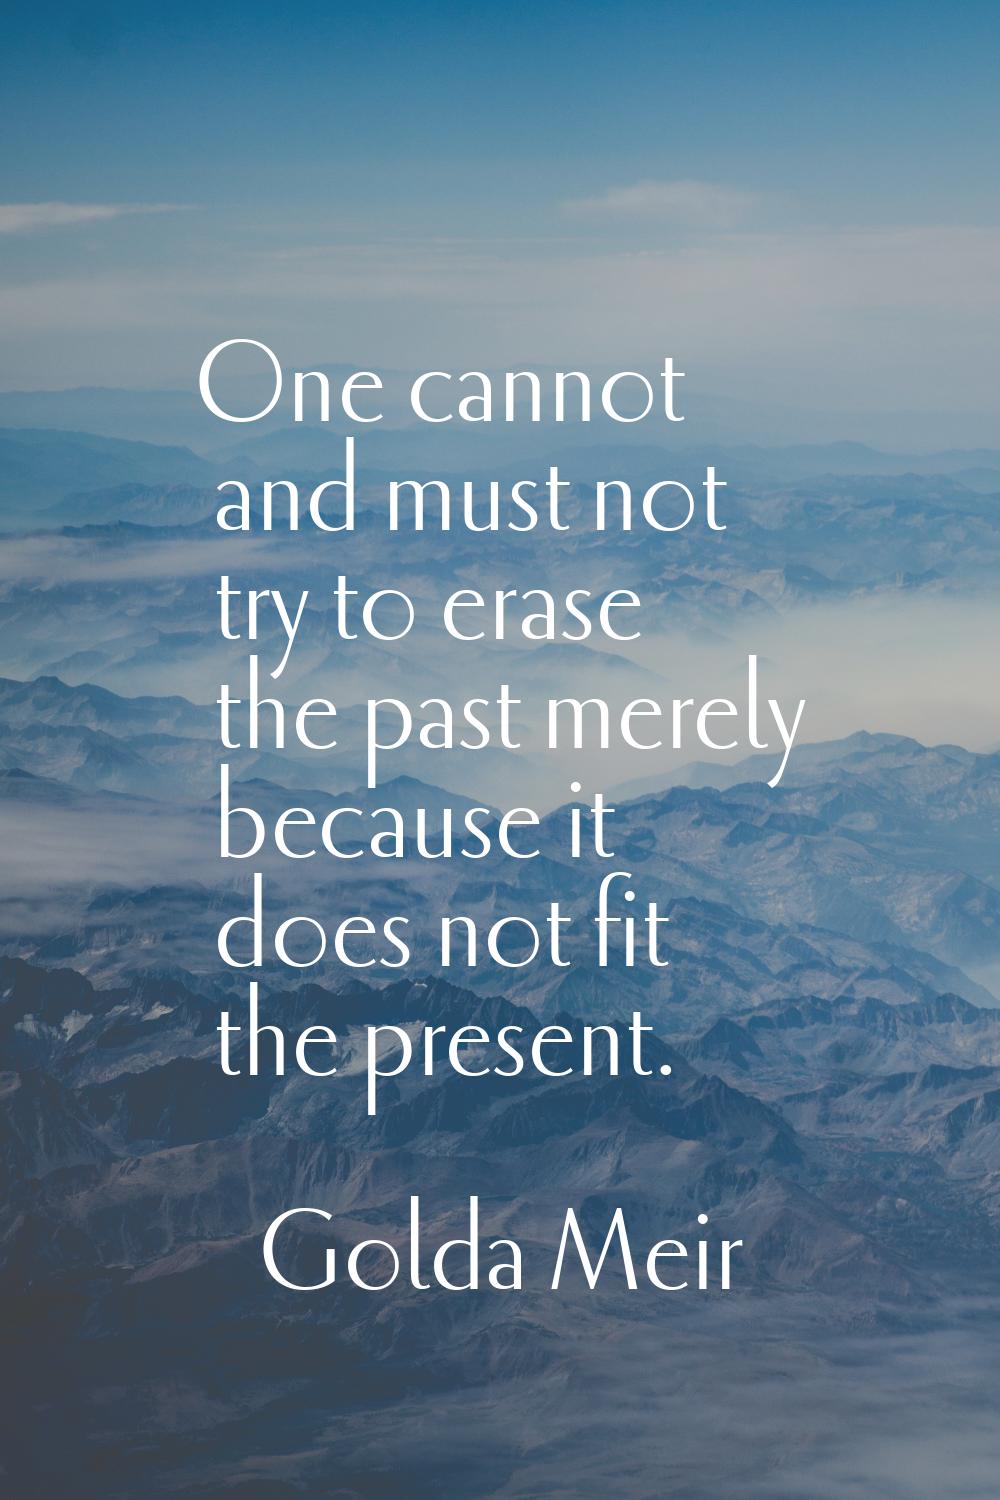 One cannot and must not try to erase the past merely because it does not fit the present.